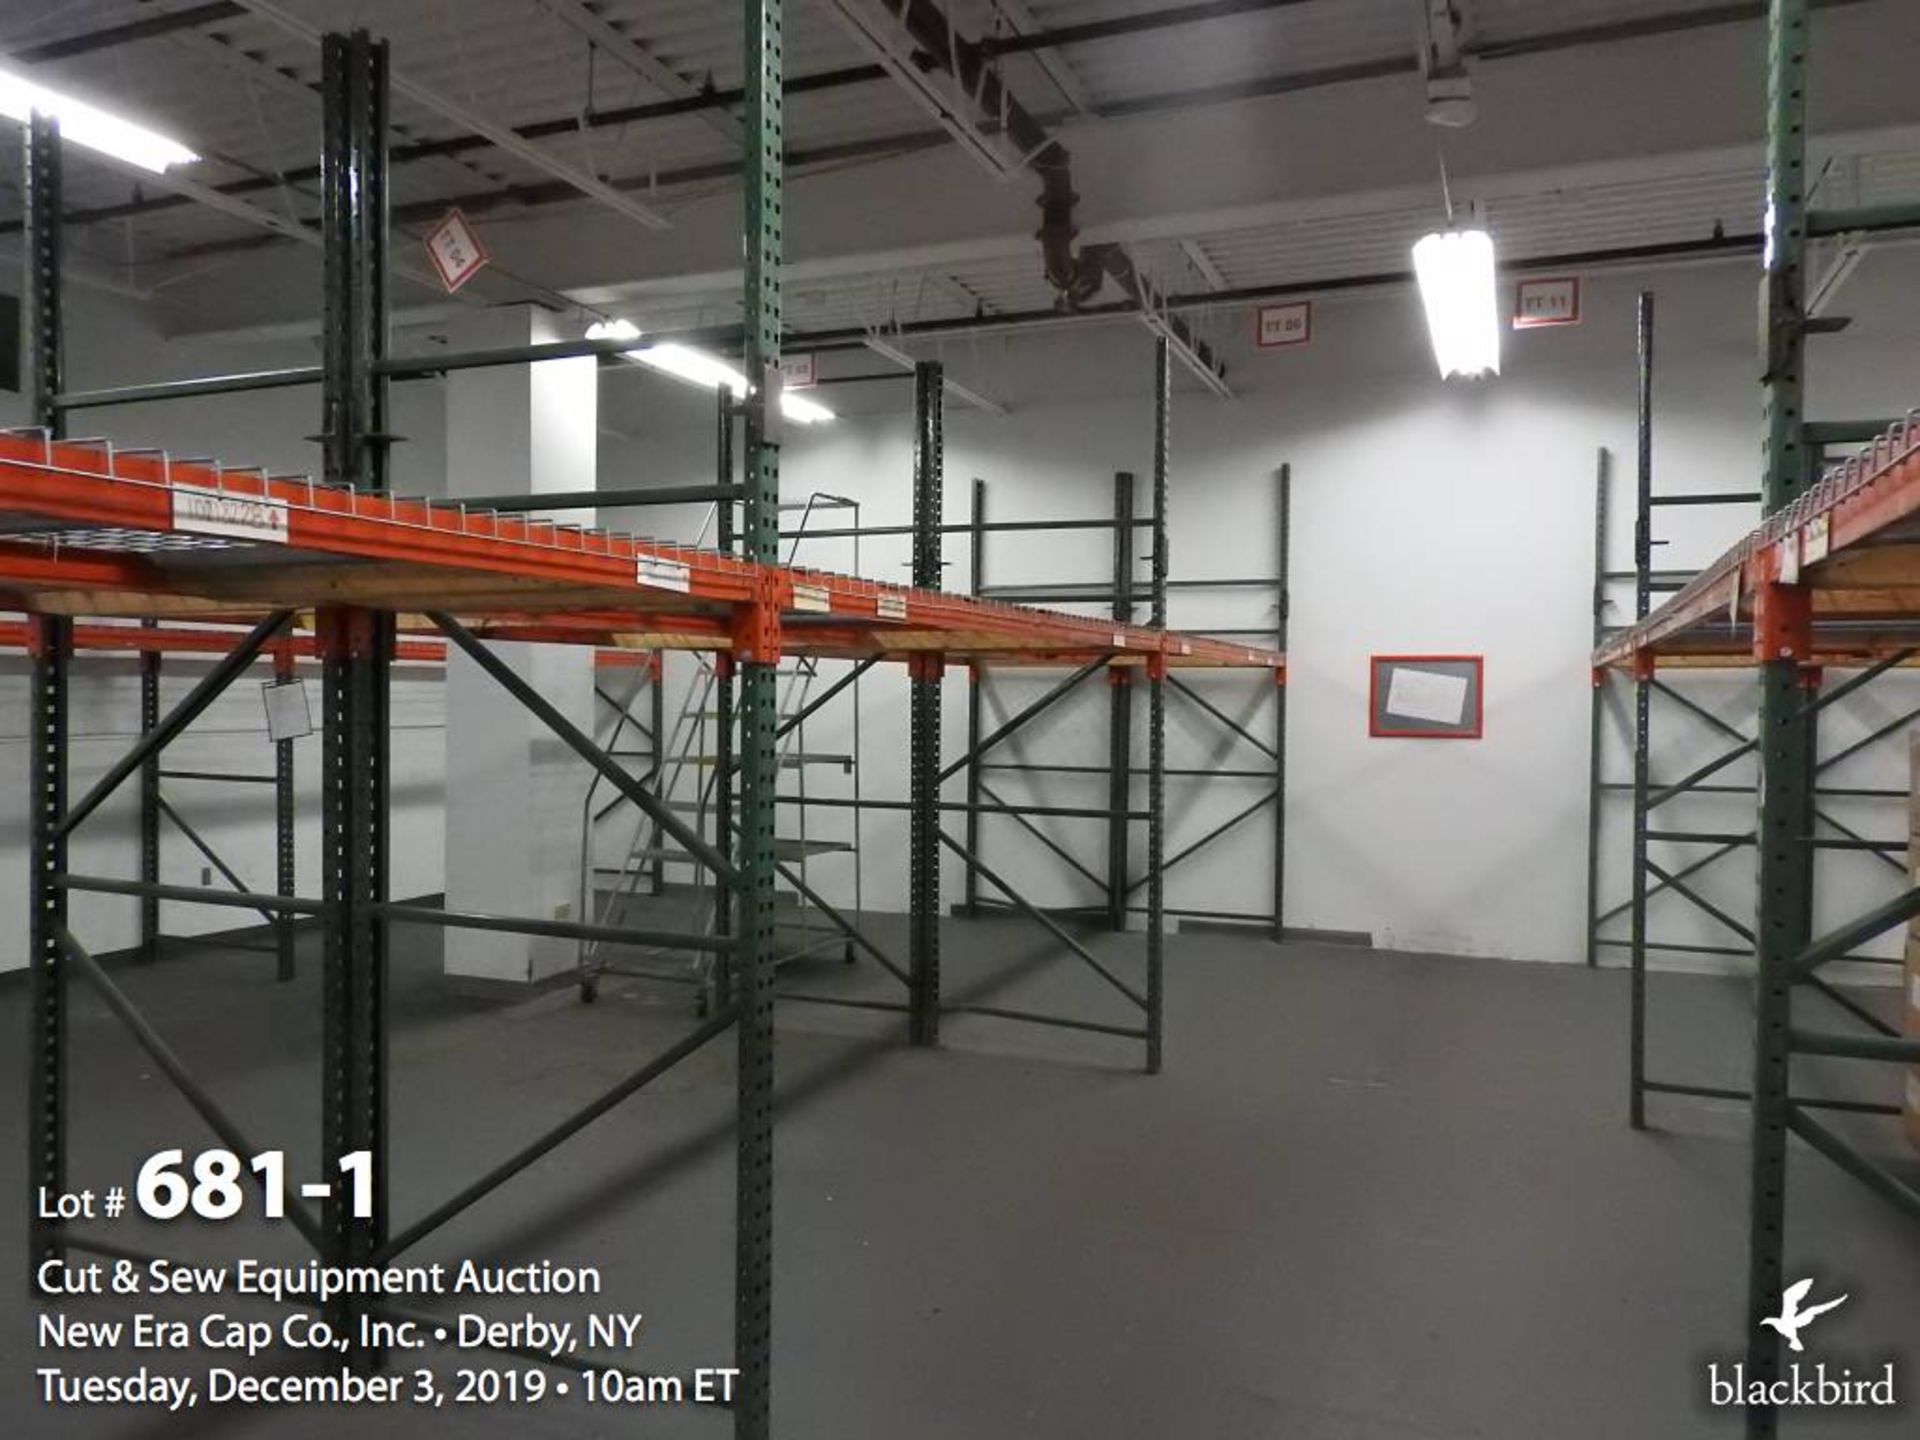 12 Sections pallet racking, 11' x 42" x 10' with wire shelves, bid per section - 12x the money